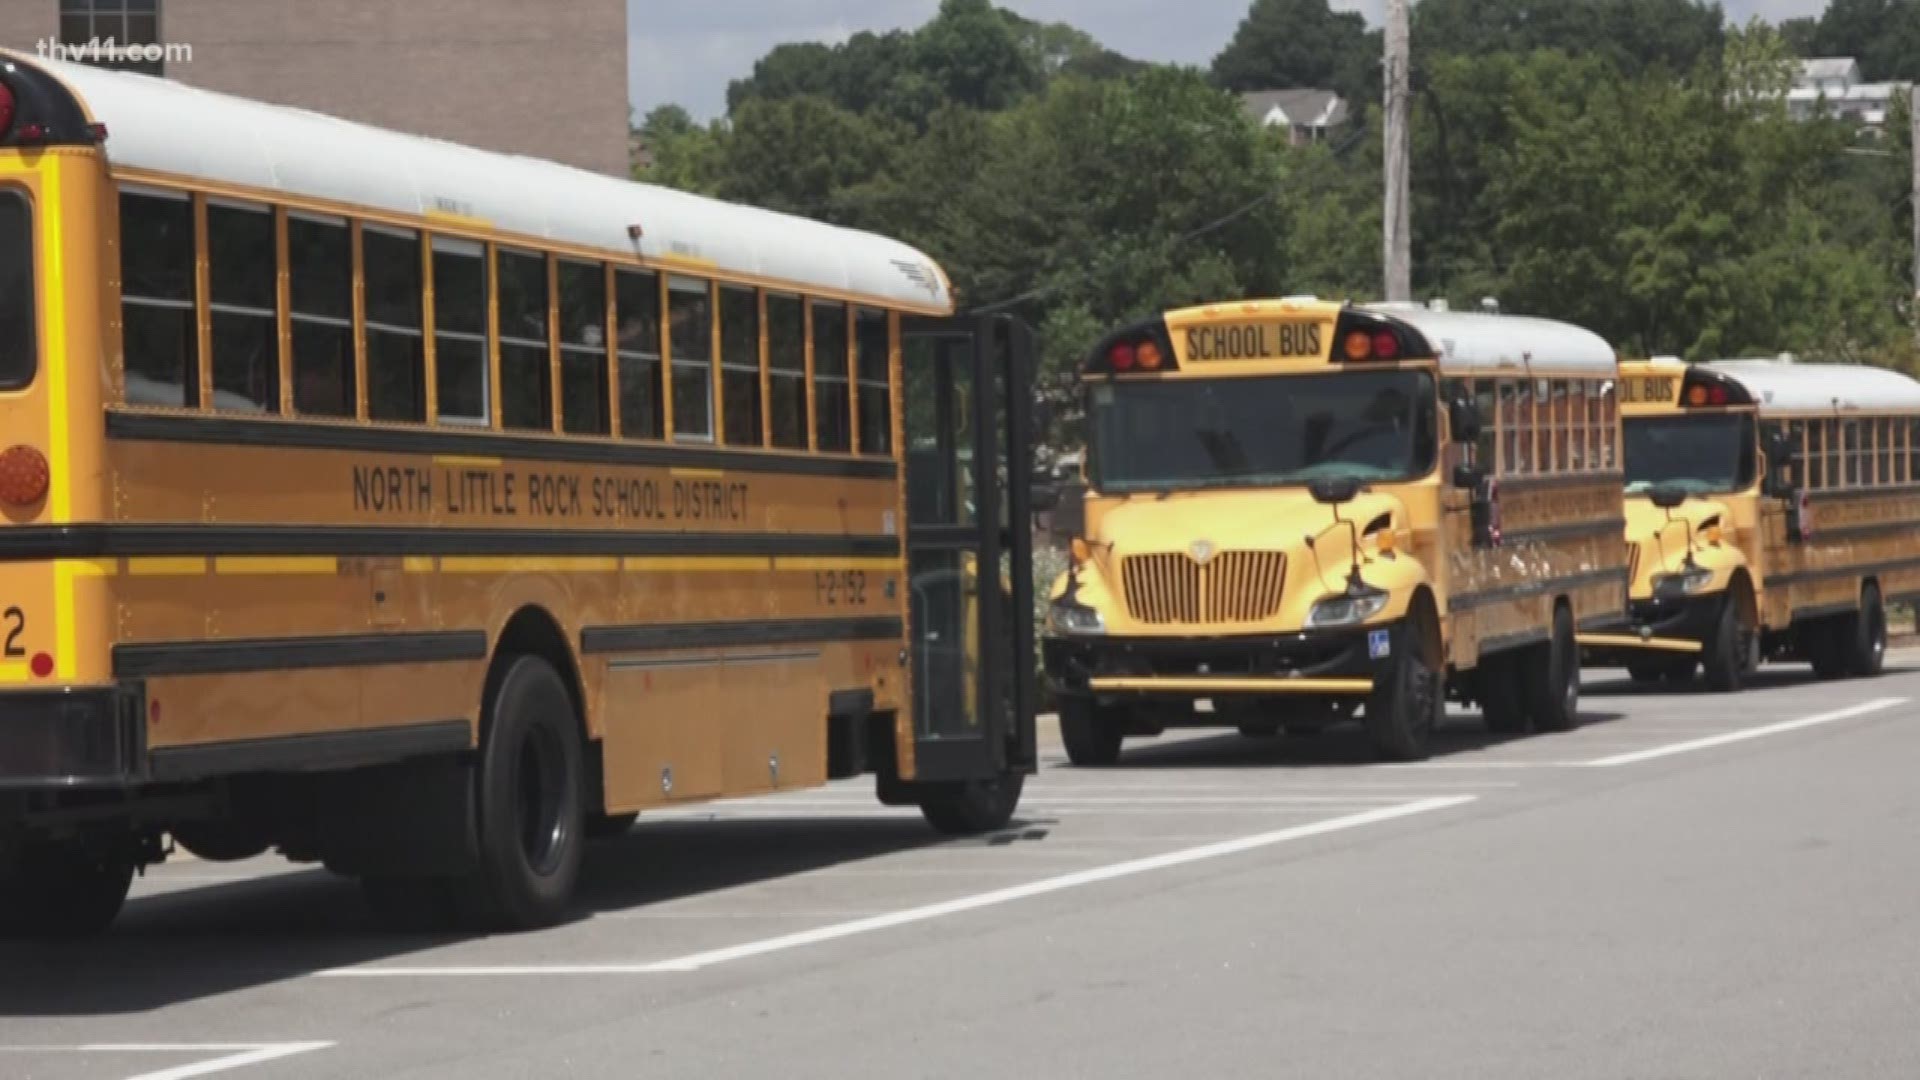 It's been a week since school has started and changes are already being made at North Little Rock schools.